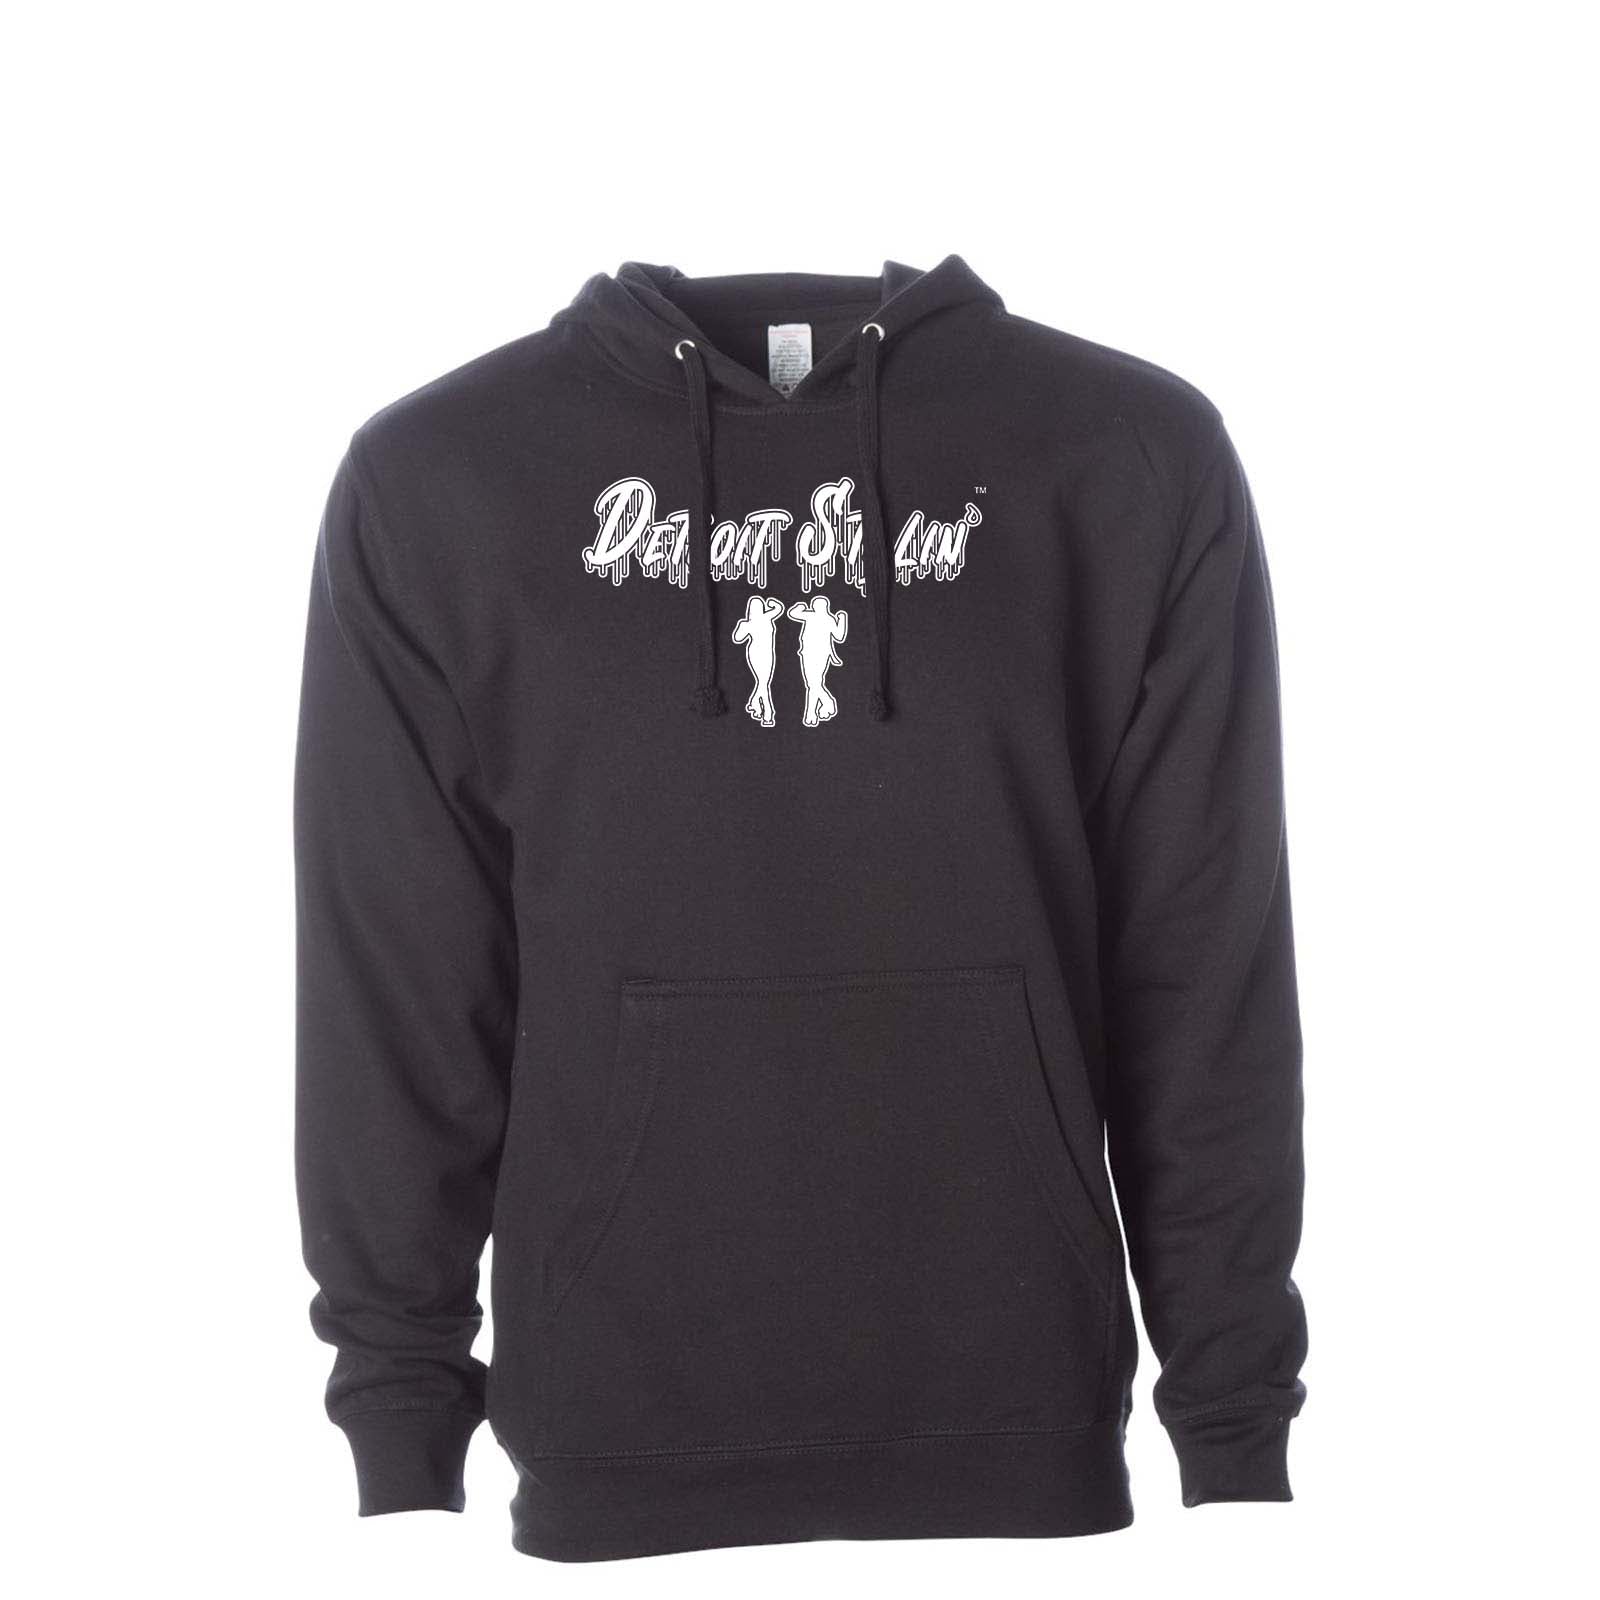 Detroit Stylin Independent Trading Co. Midweight Hooded Sweatshirt Printed - Mato & Hash